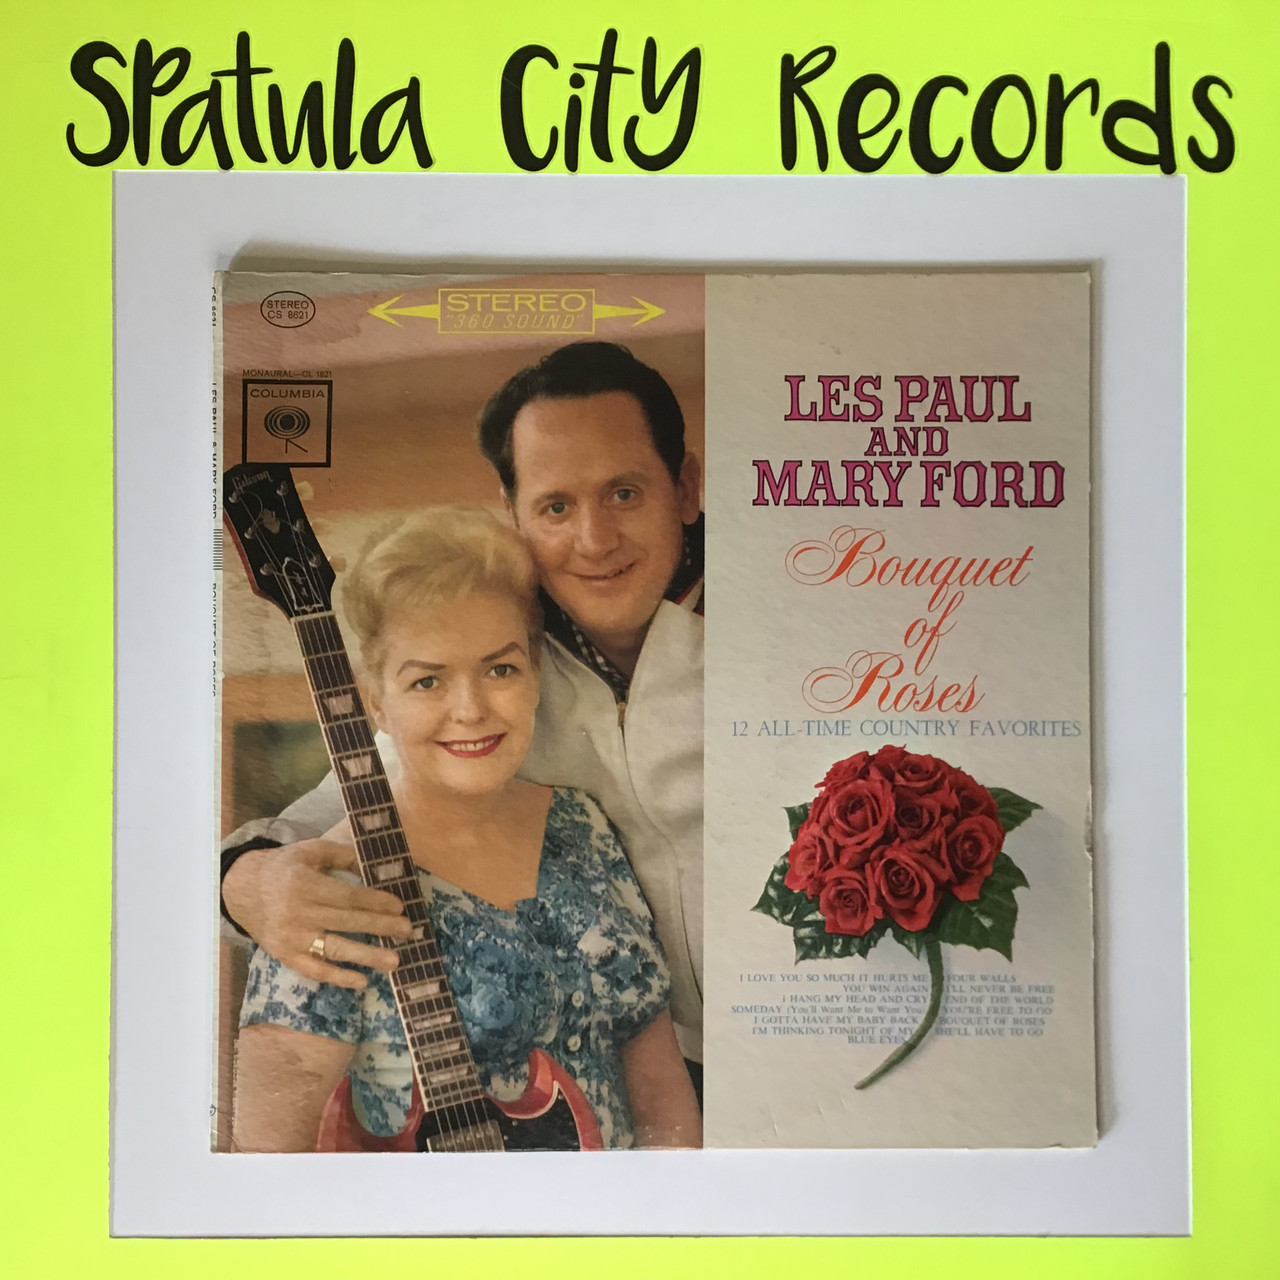 Les Paul and Mary Ford - Bouquet of Roses - vinyl record album LP